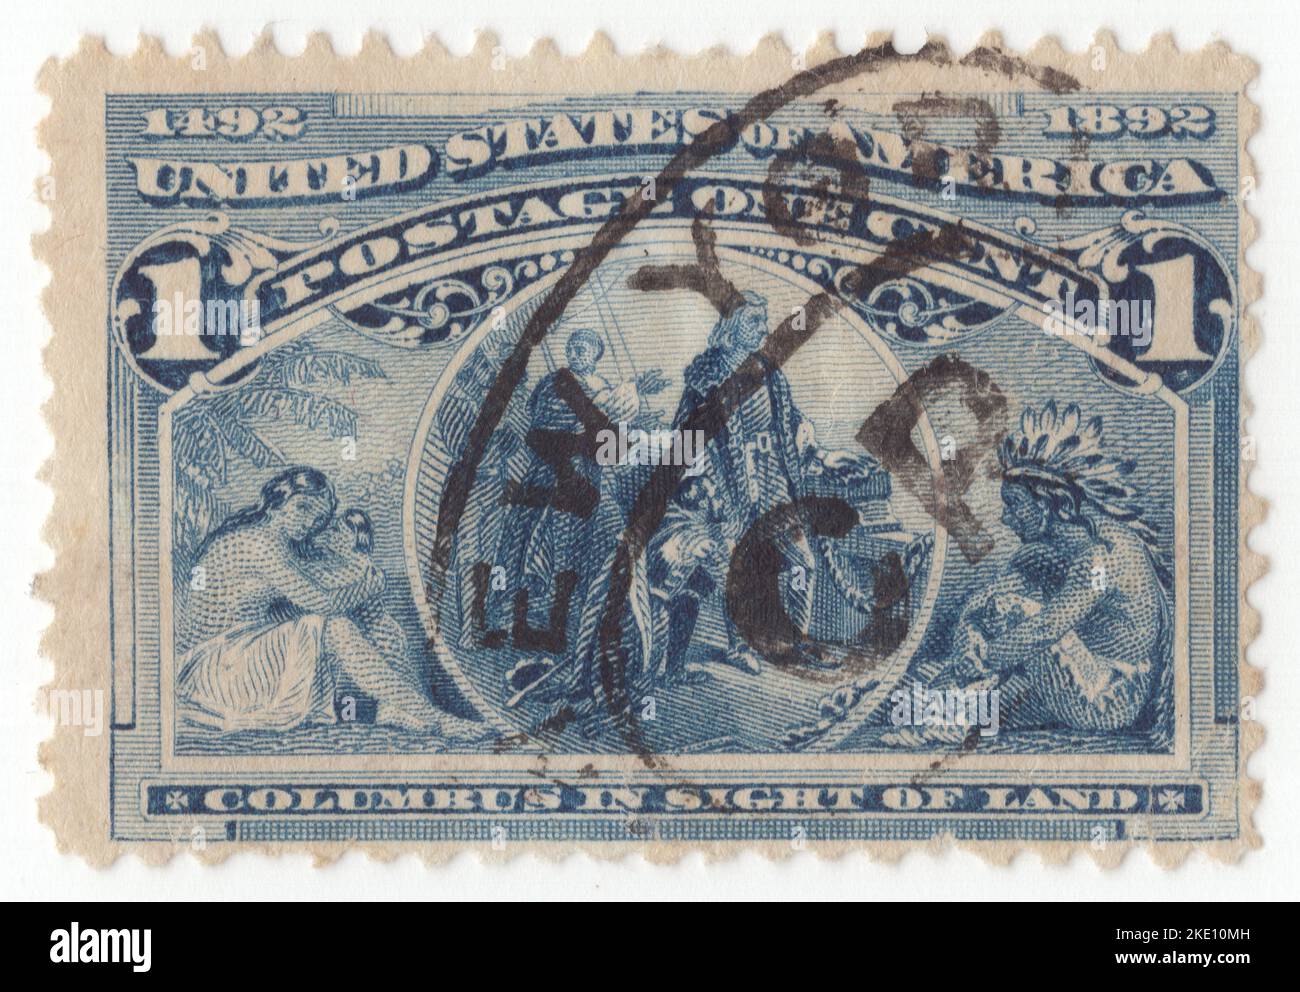 USA - 1893: An 1 cent deep blue postage stamp depicting scene Columbus in Sight of Land, Columbian Issue. The World Columbian Exposition of 1893 commemorated the 400th anniversary of the landing of Christopher Columbus in the Americas. The stamps were interesting and attractive, designed to appeal to not only postage stamps collectors but to historians, artists and of course the general public who bought them in record numbers because of the fanfare of the Columbian Exposition of the World's Fair of 1892 in Chicago, Illinois Stock Photo